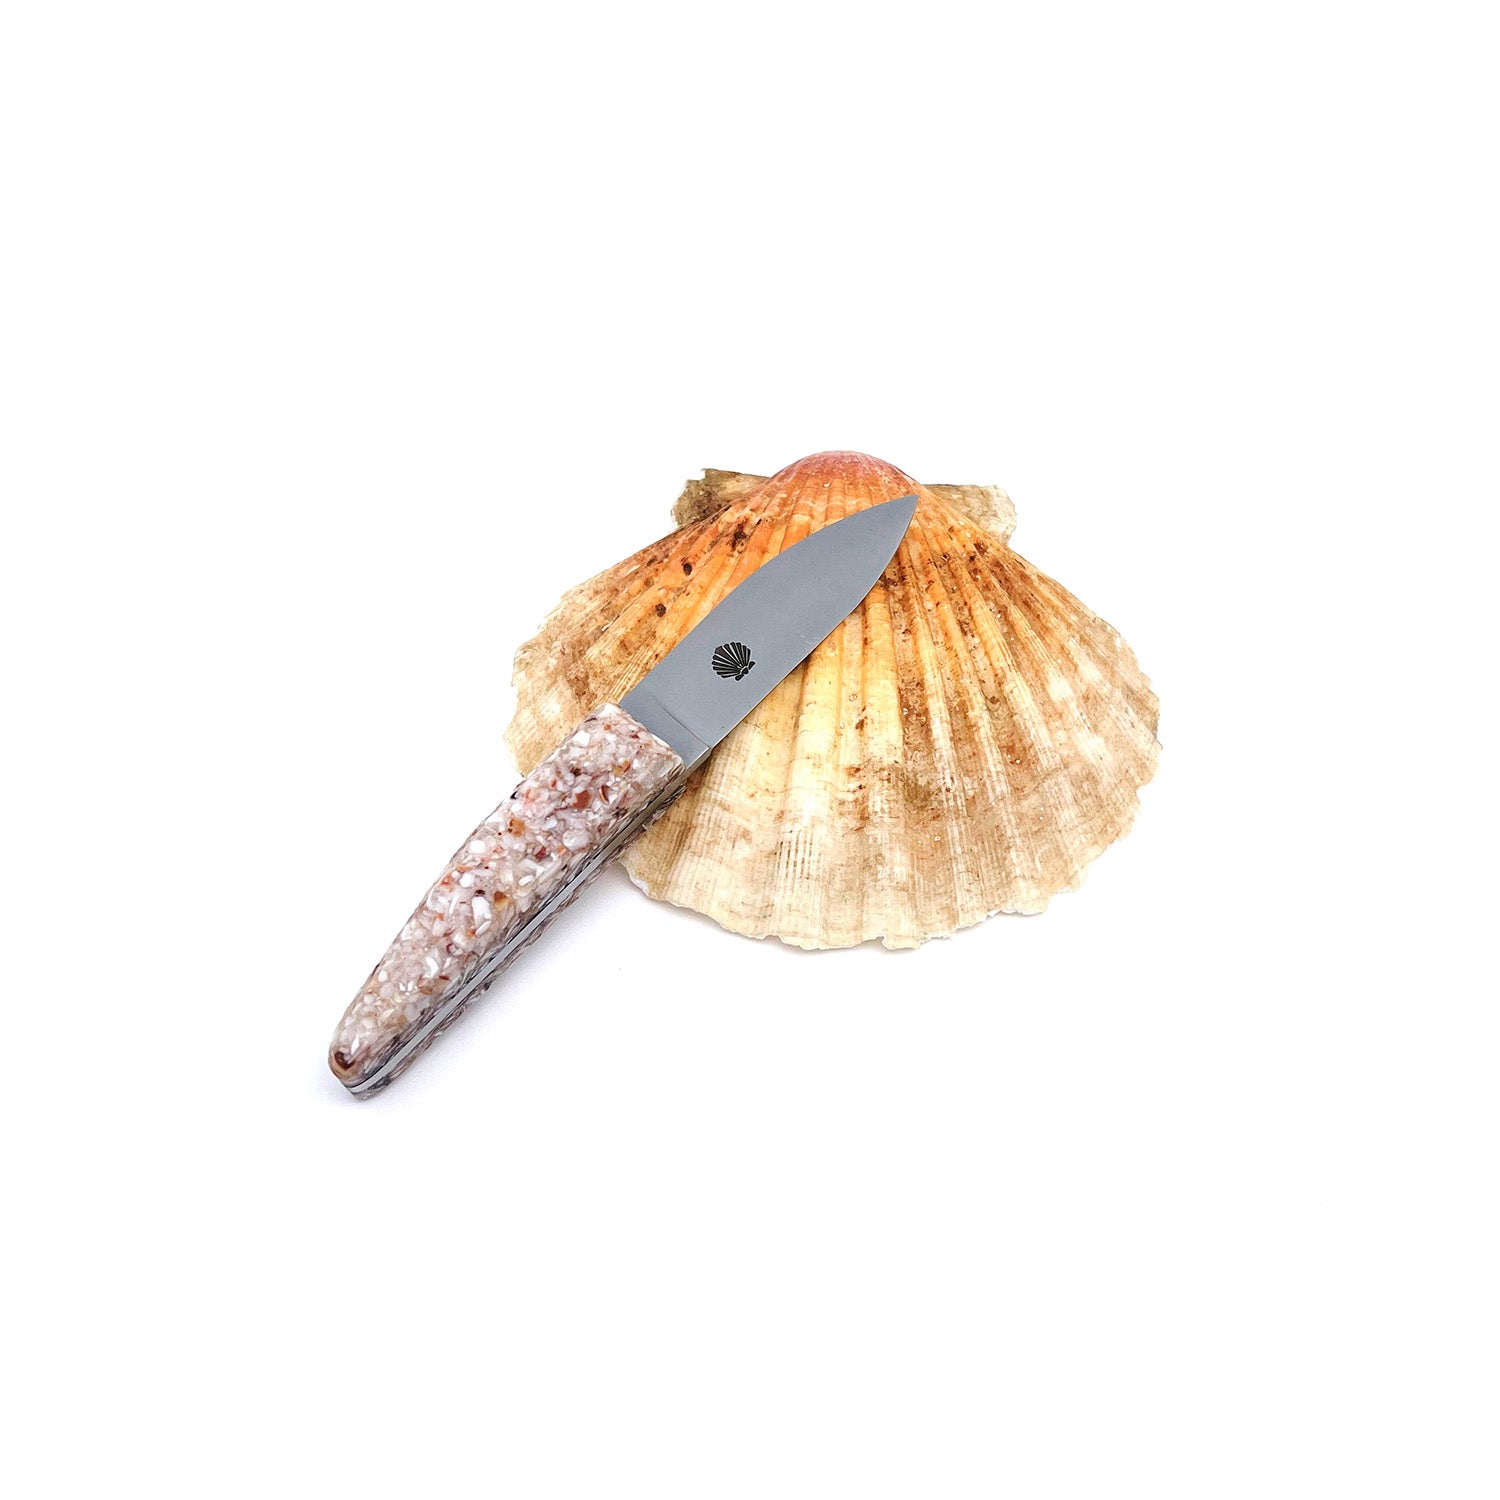 Small cutter with a handle made from recycled scallop shells